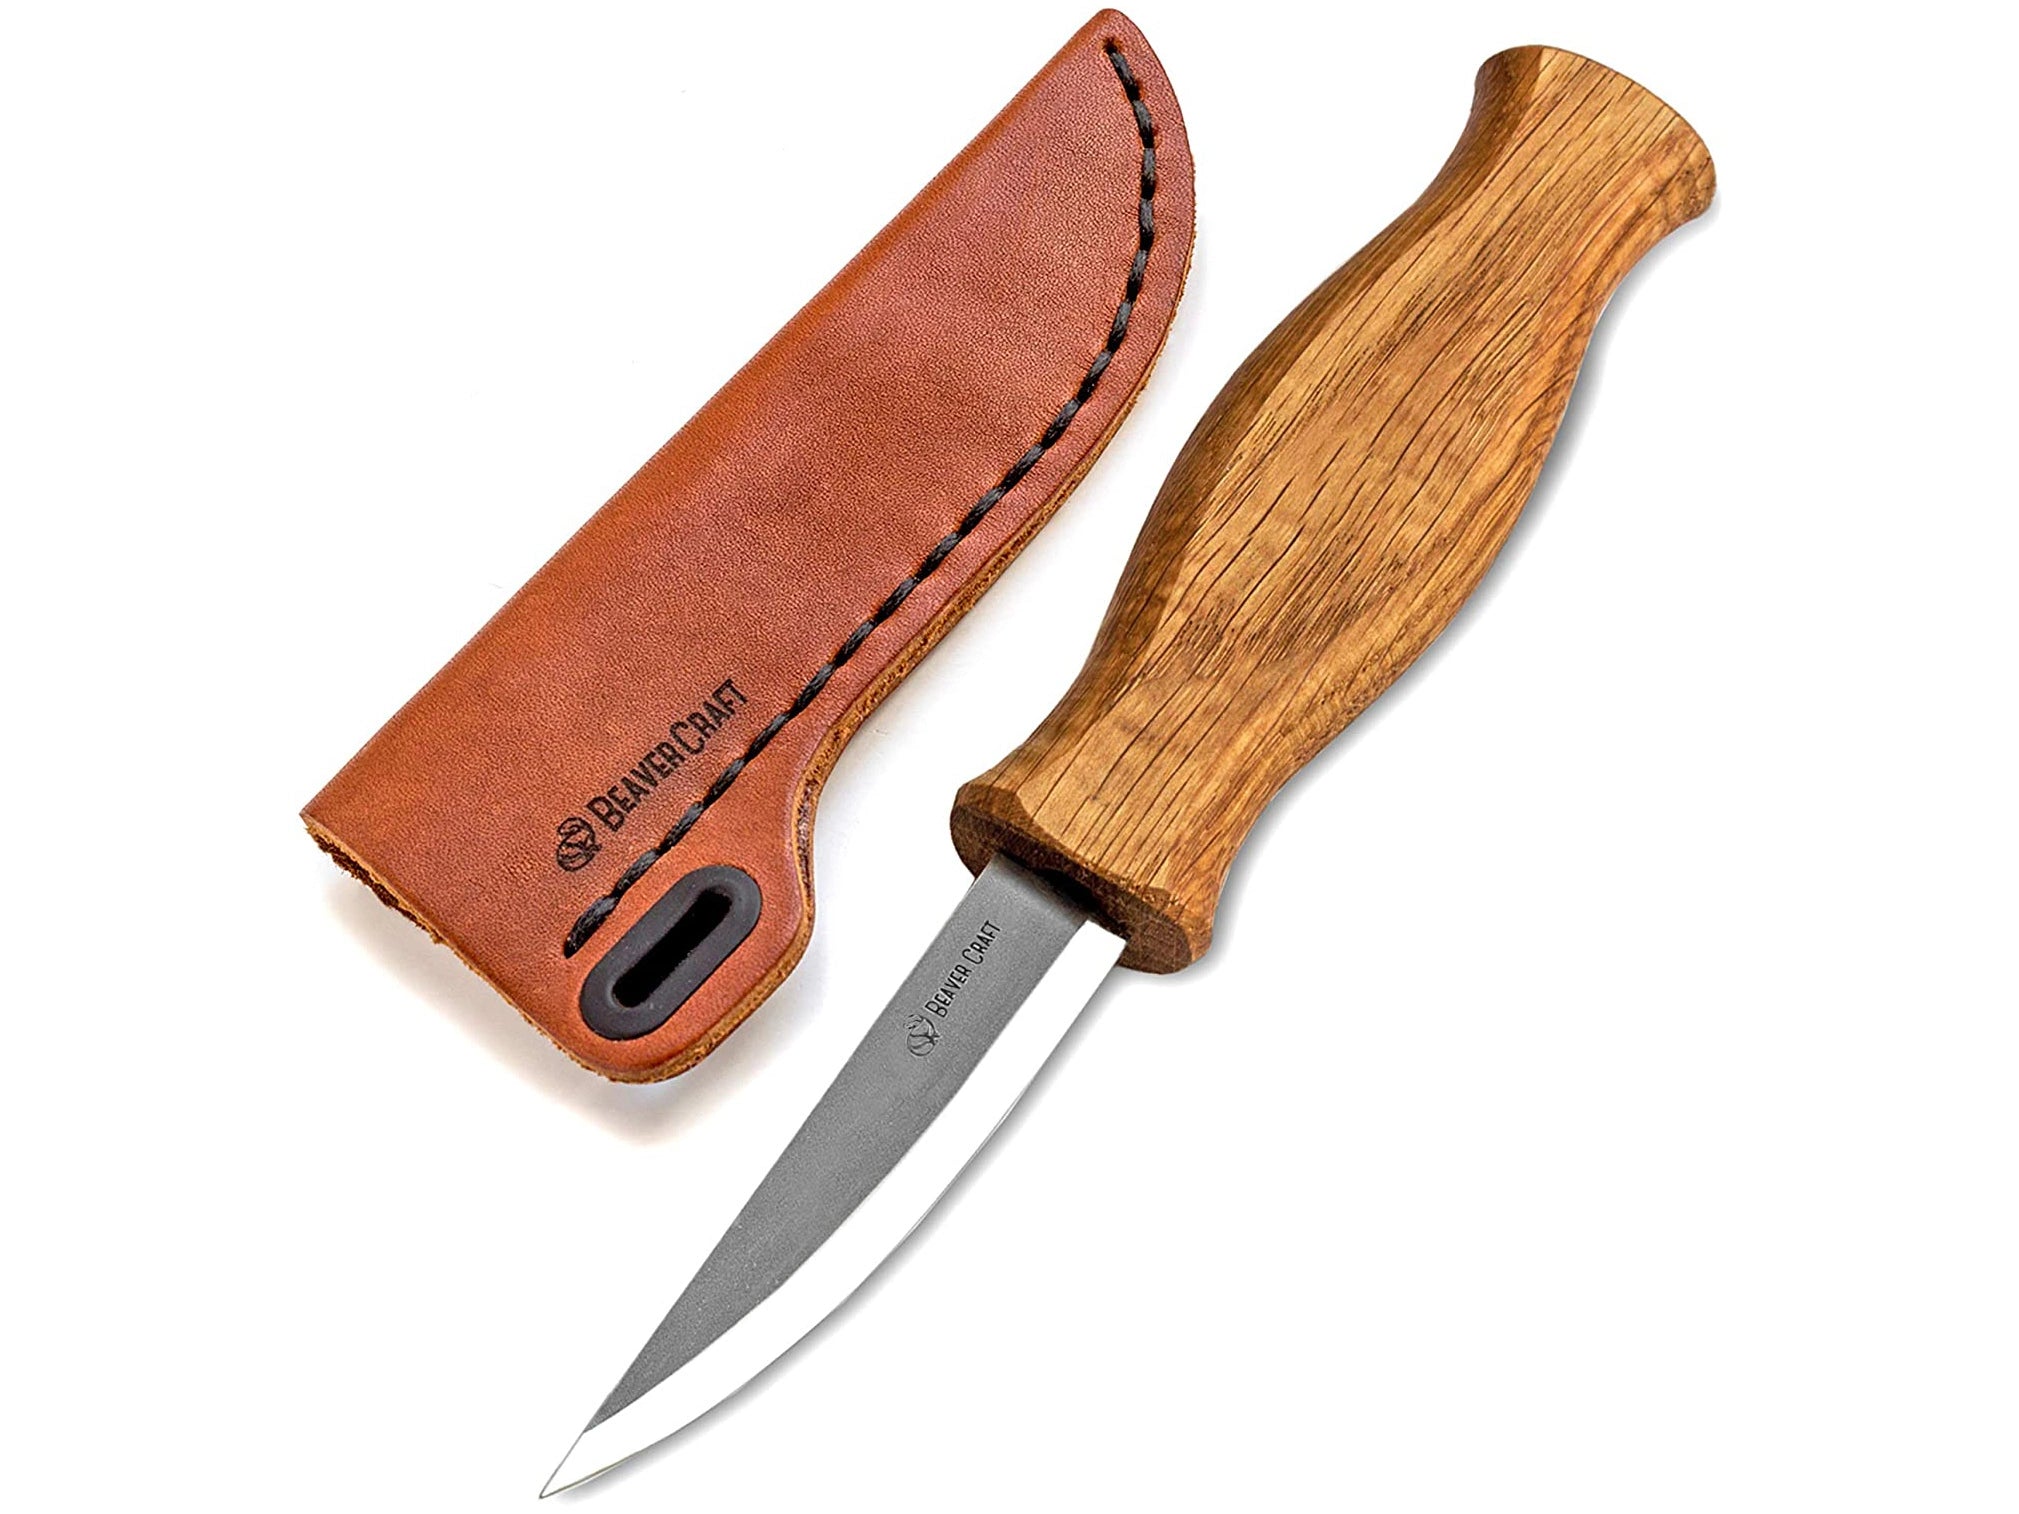 Carving Knife, Whittling Knife, Wood Carving Knife With a Leather Knife  Sheath Beavercraft C4 SH1 